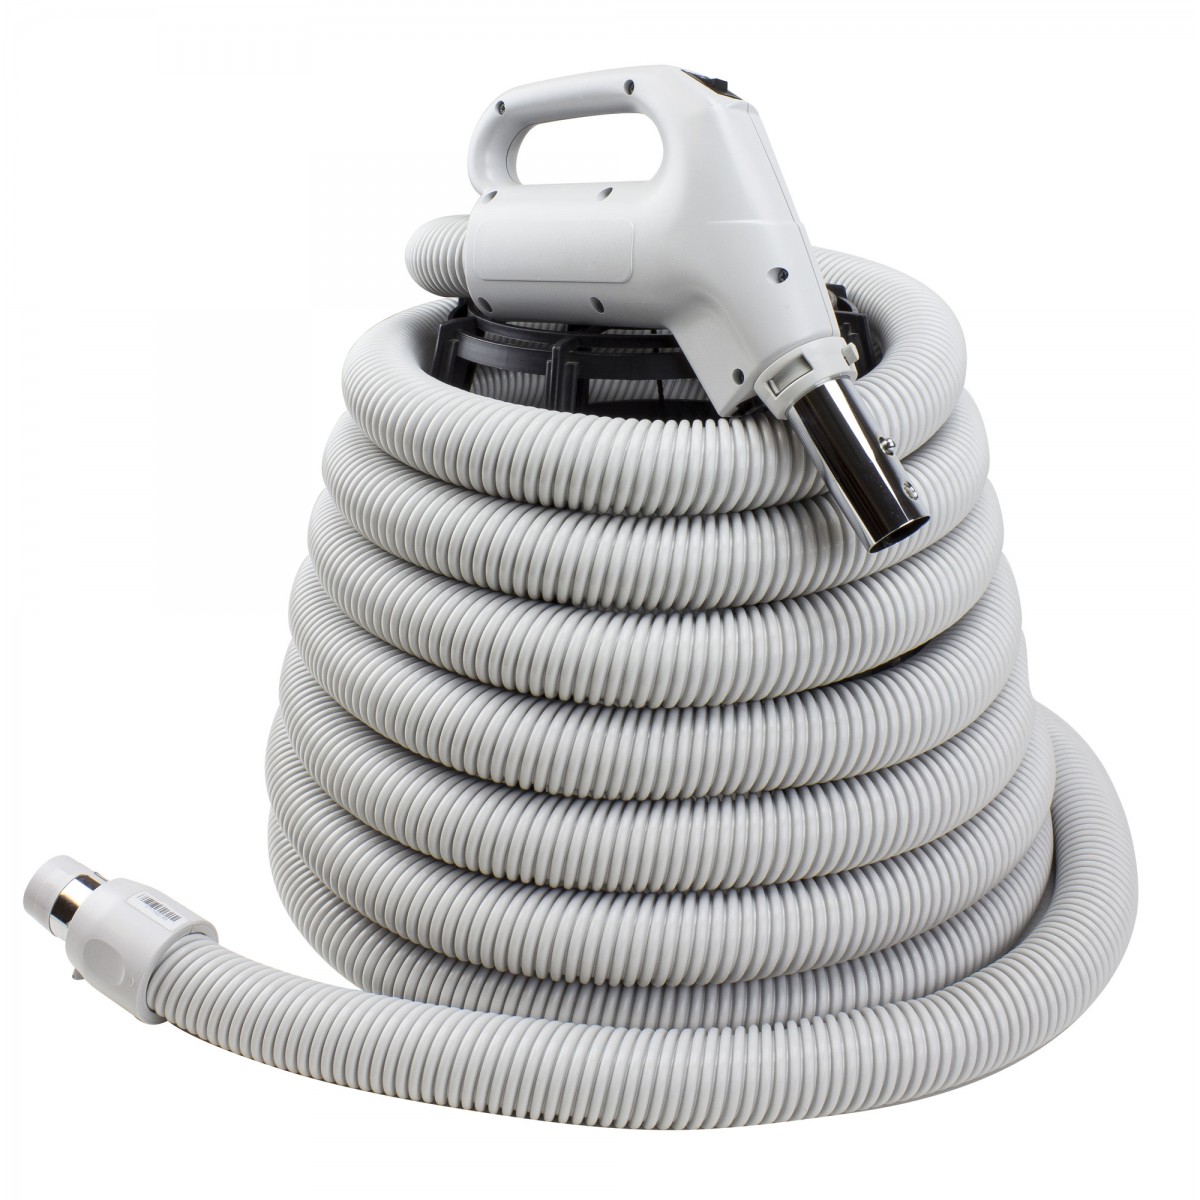 Universal Complete Hose With Button For Central Vac 24v 1 3 8 X 30 Gas Pump Grey